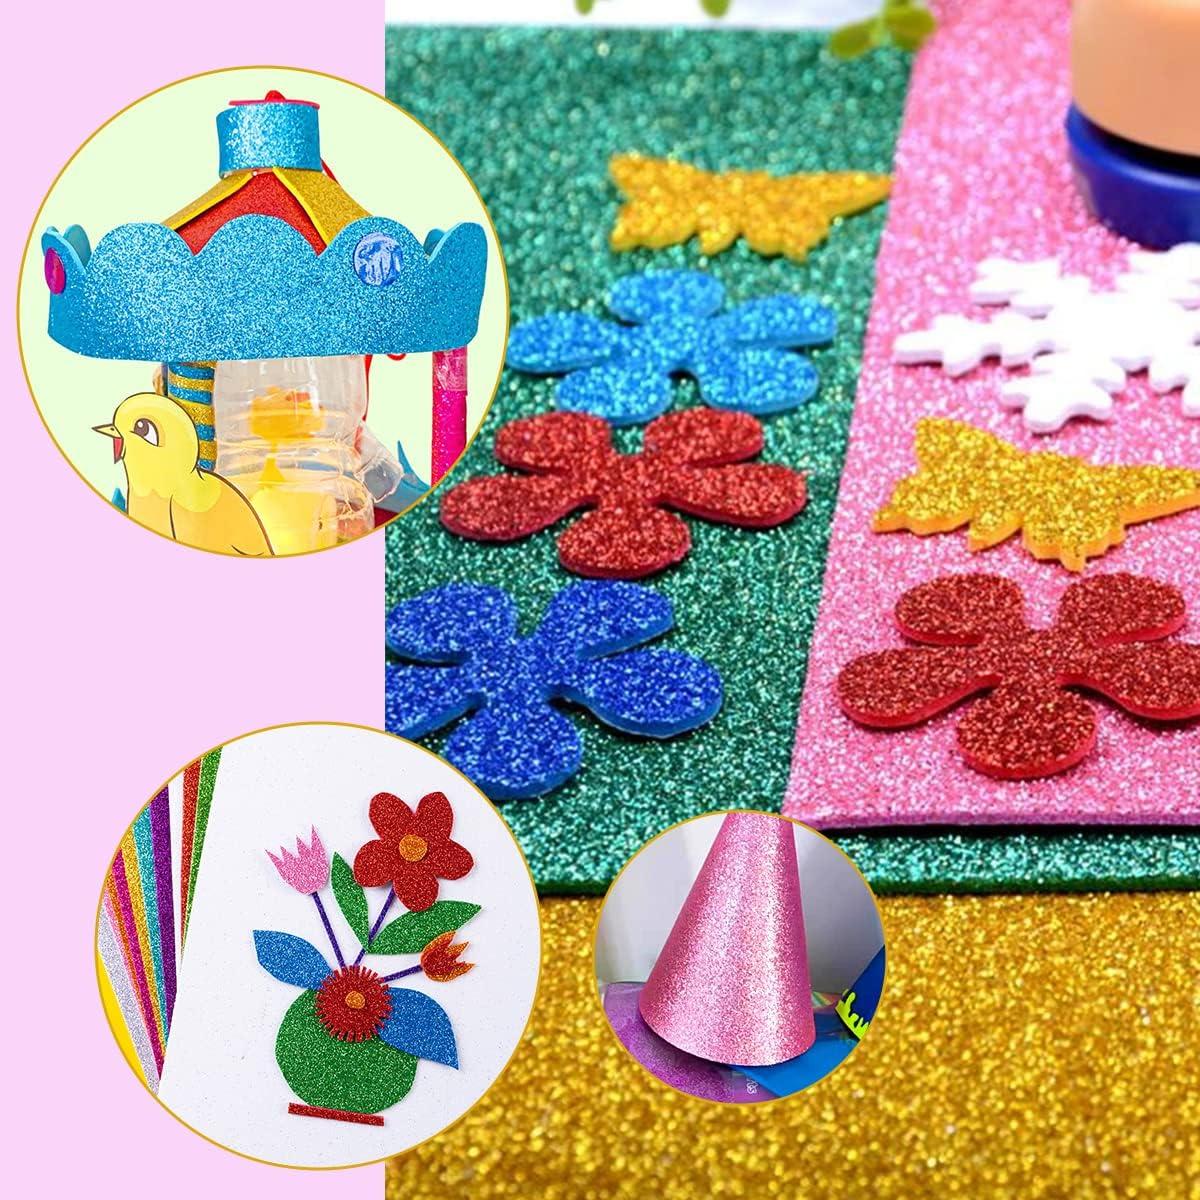 Healifty 10pcs Sheets Glitter Origami Paper Glitter cardstock Paper Glitter  Paper for DIY Art Craft Projects Supplies Gadgets for Kids Glitter Paper